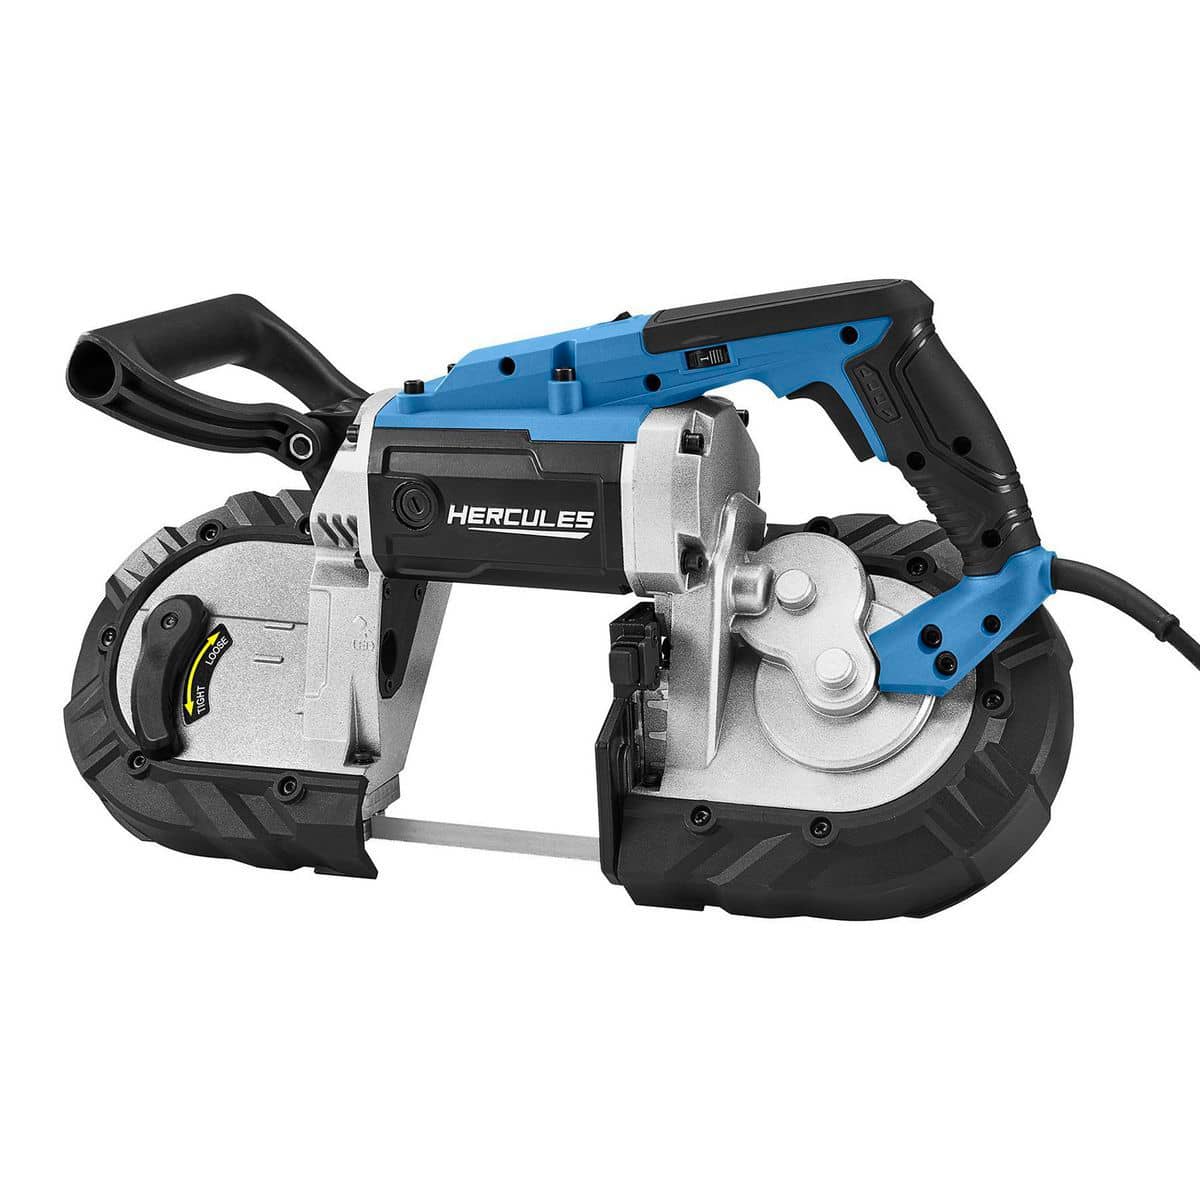 HERCULES 11 Amp 5 in. Deep Cut Variable-Speed Band Saw